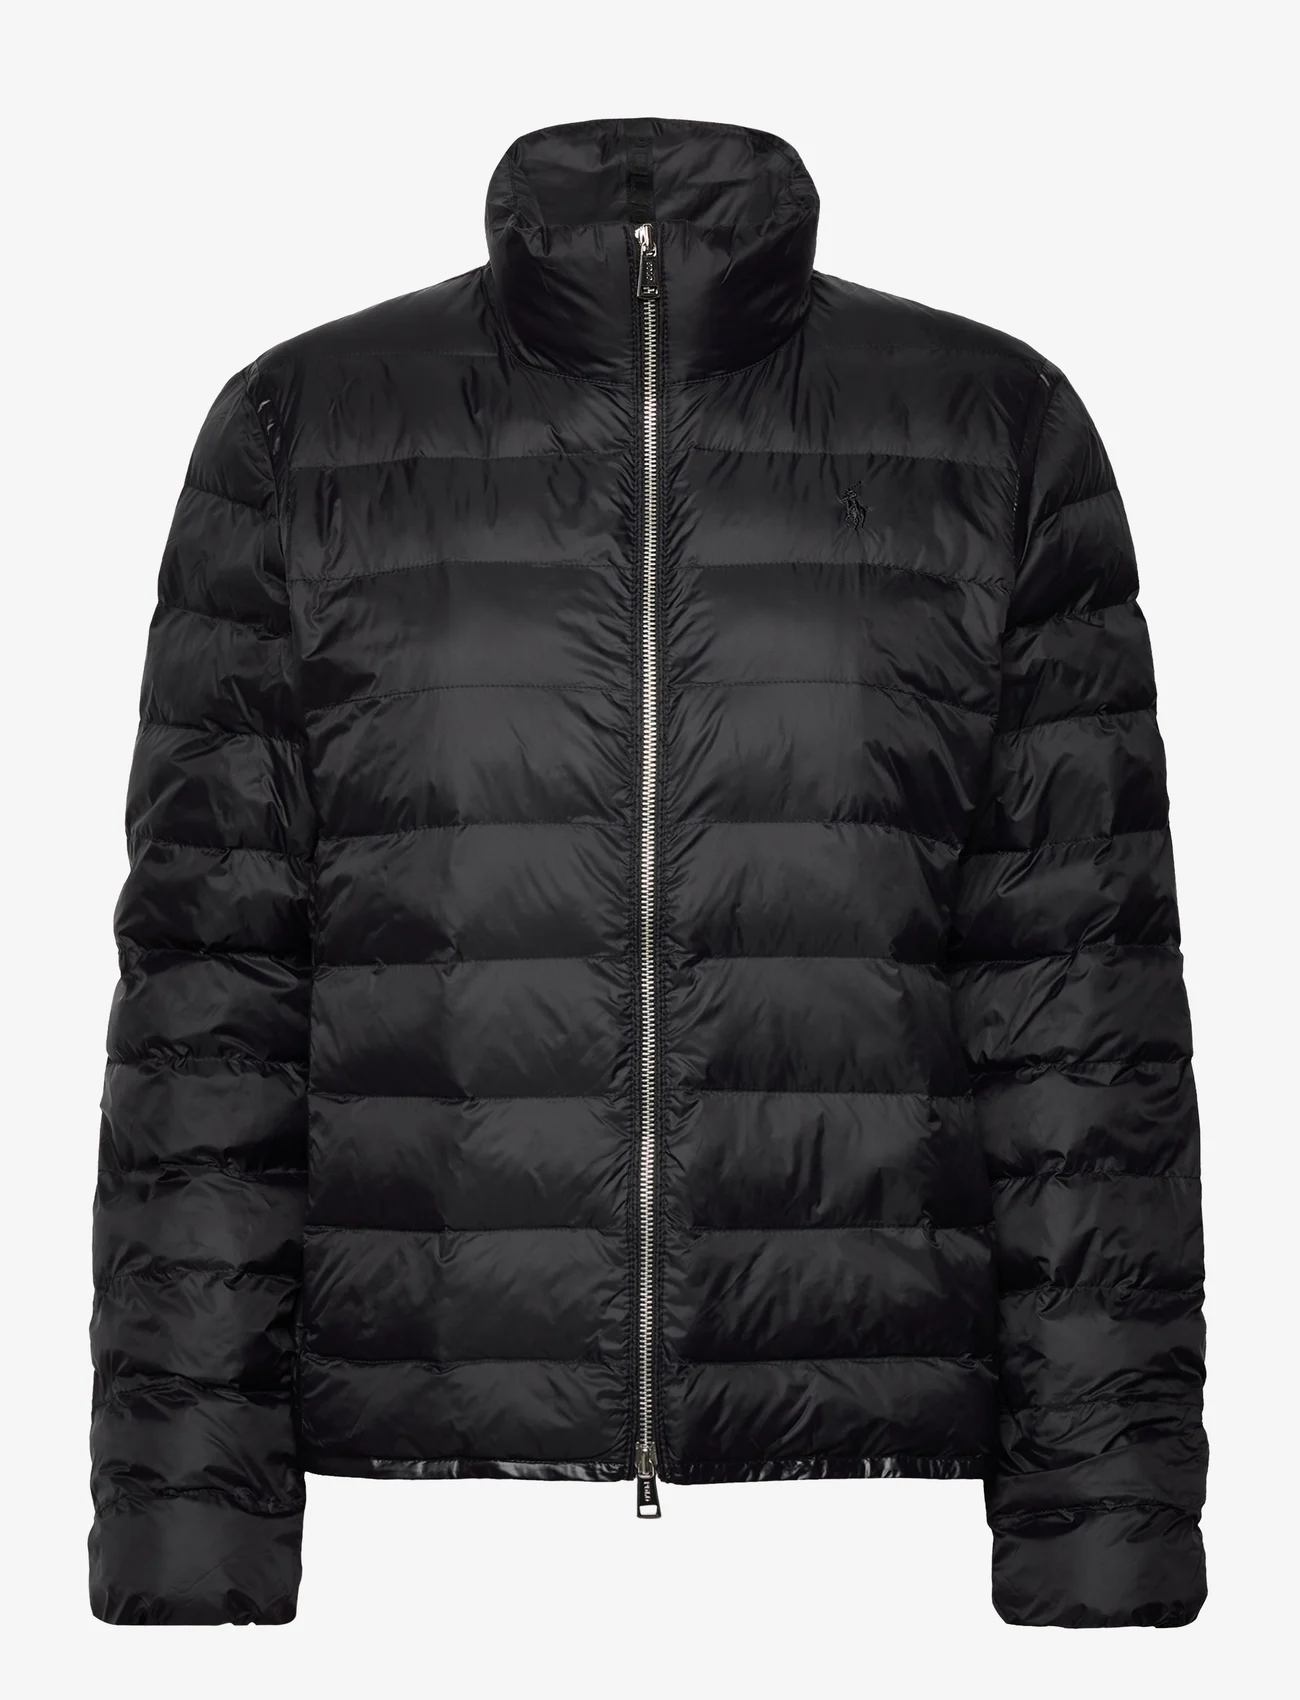 Polo Ralph Lauren - Packable Quilted Jacket - paminkštintosios striukės - polo black - 0